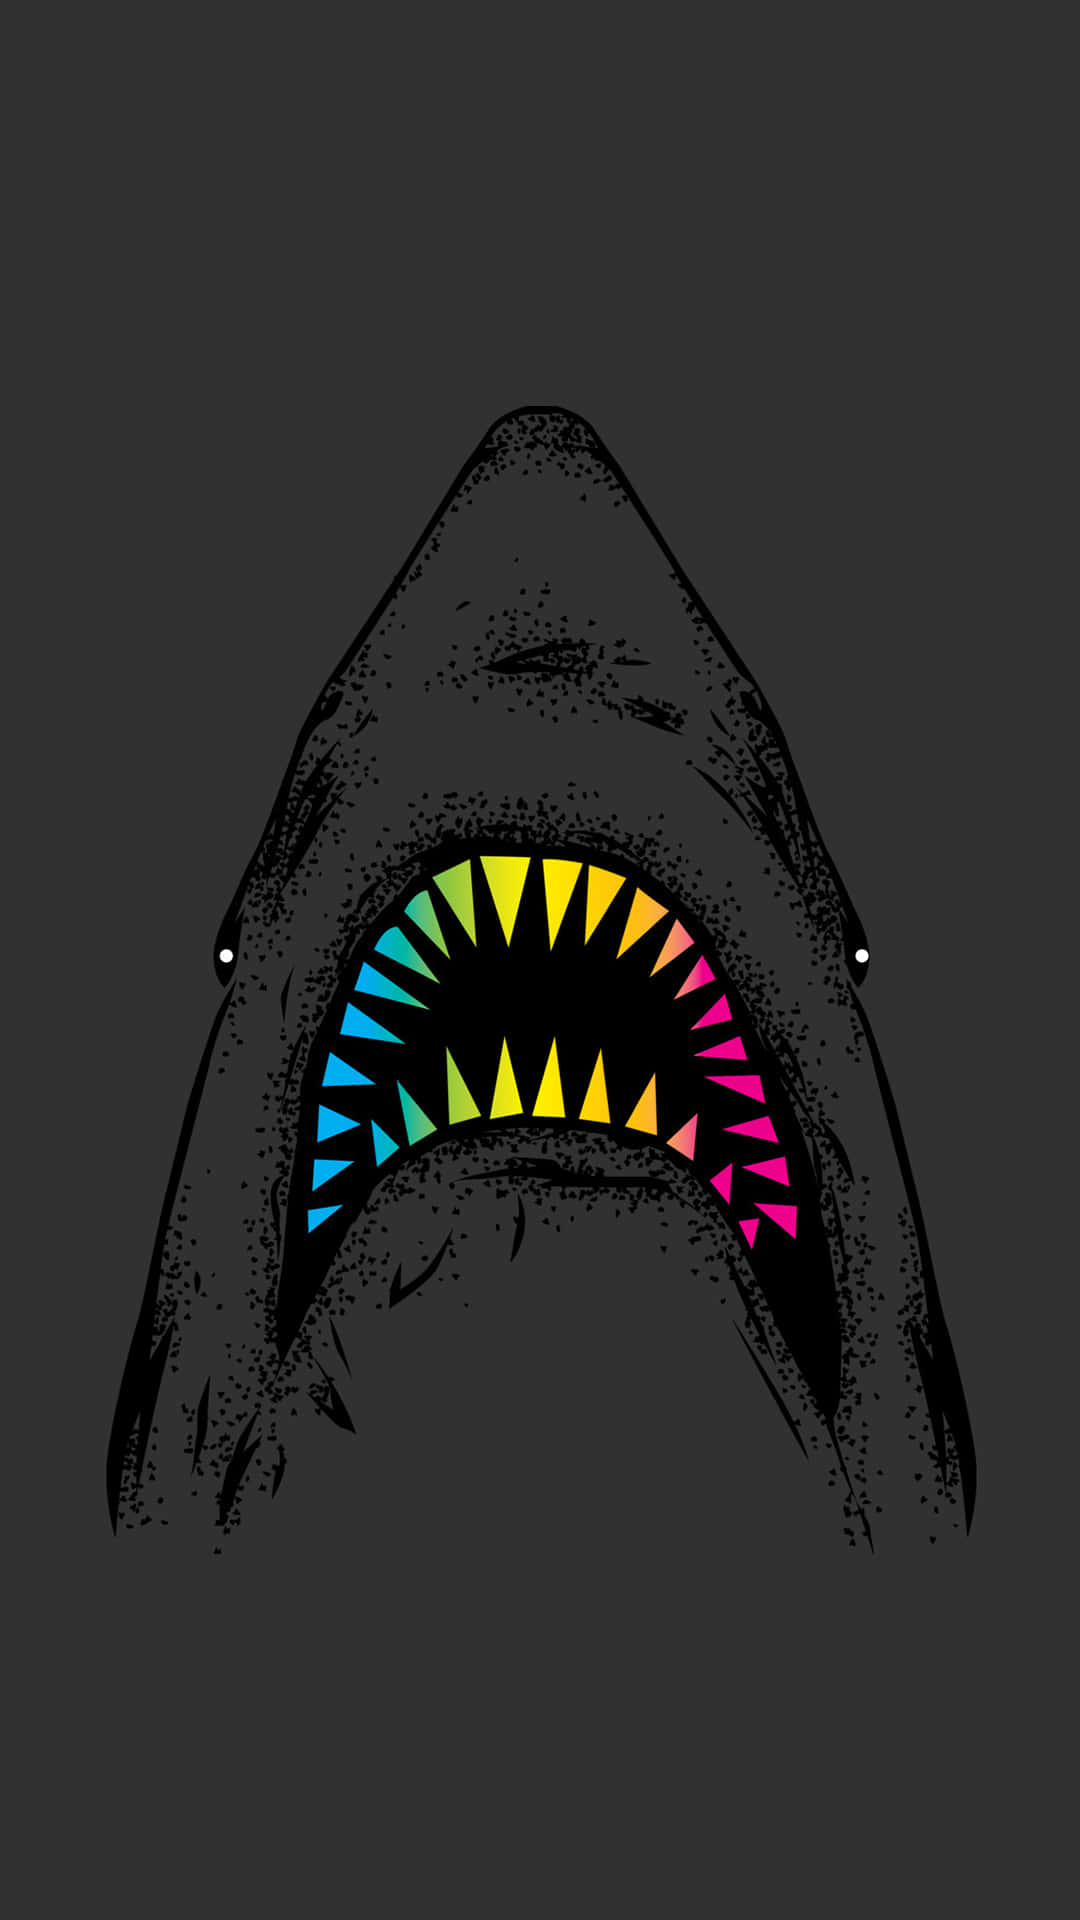 A close view of a megalodon, the largest known species of shark